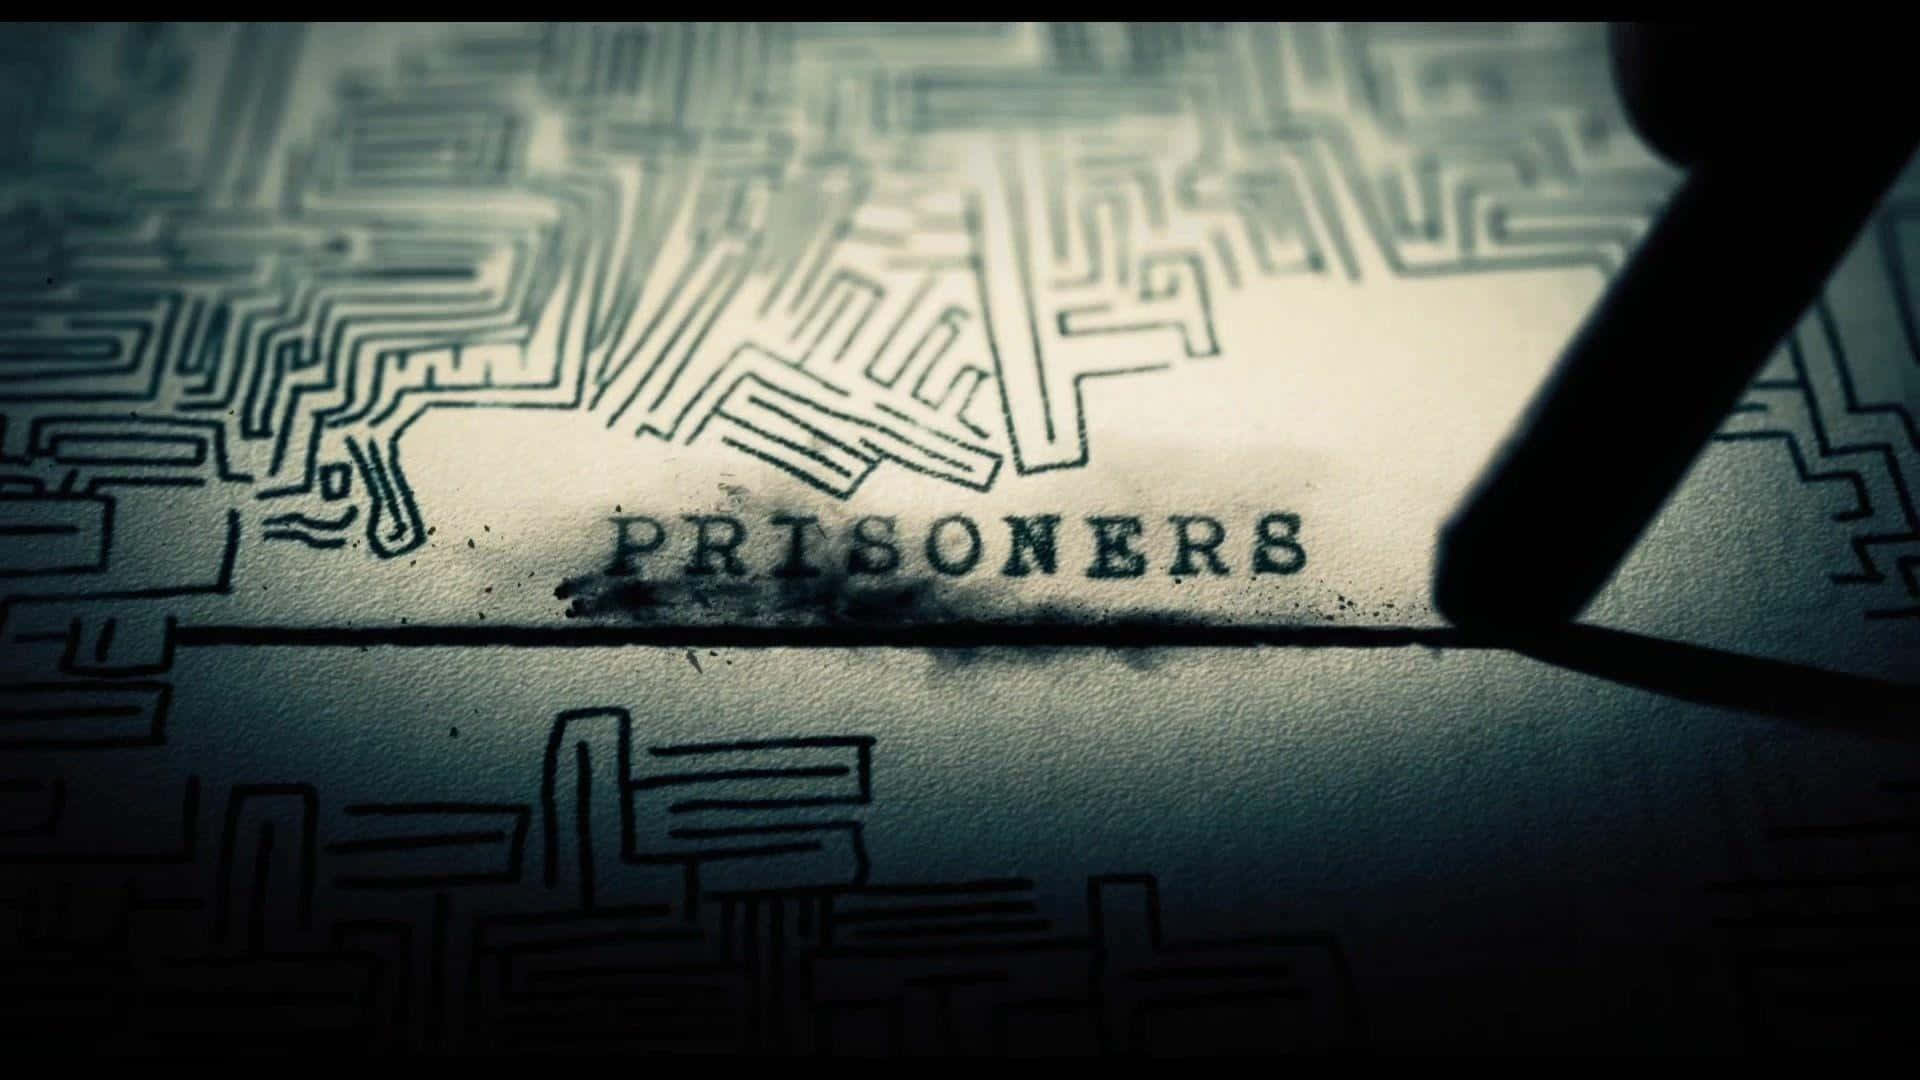 A Pen Is Pointing At A Piece Of Paper With The Word Prisoners